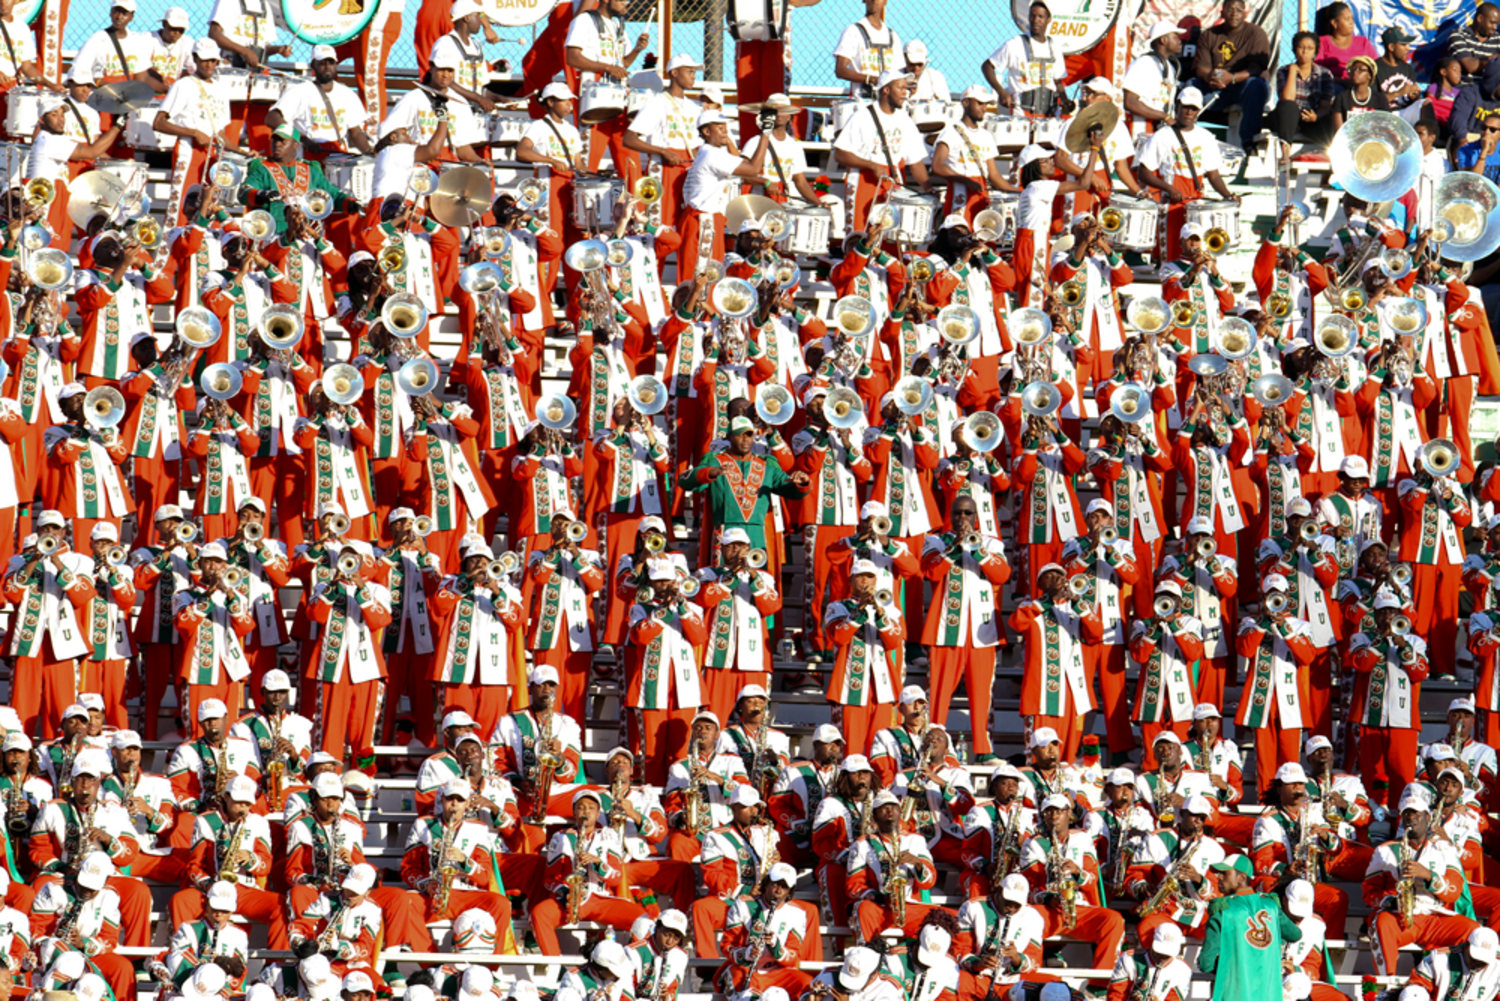 FAMU's famous marching band returns after suspension over hazing death